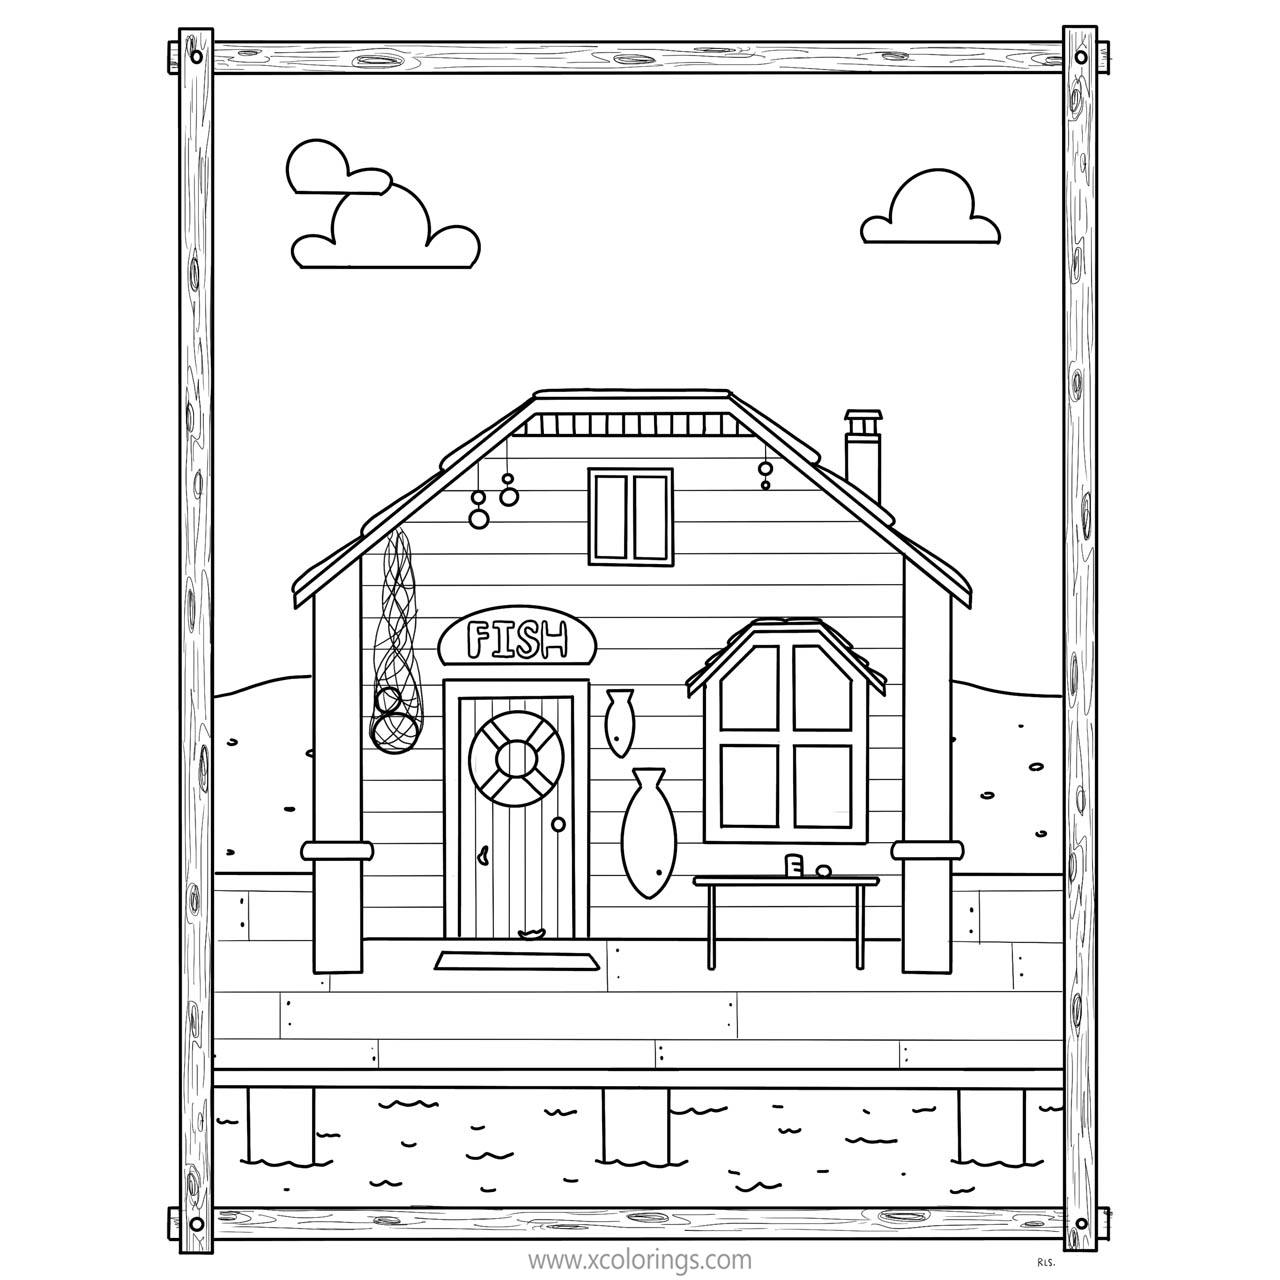 Free Stardew Valley Coloring Pages House Drawing by RobynSmith printable